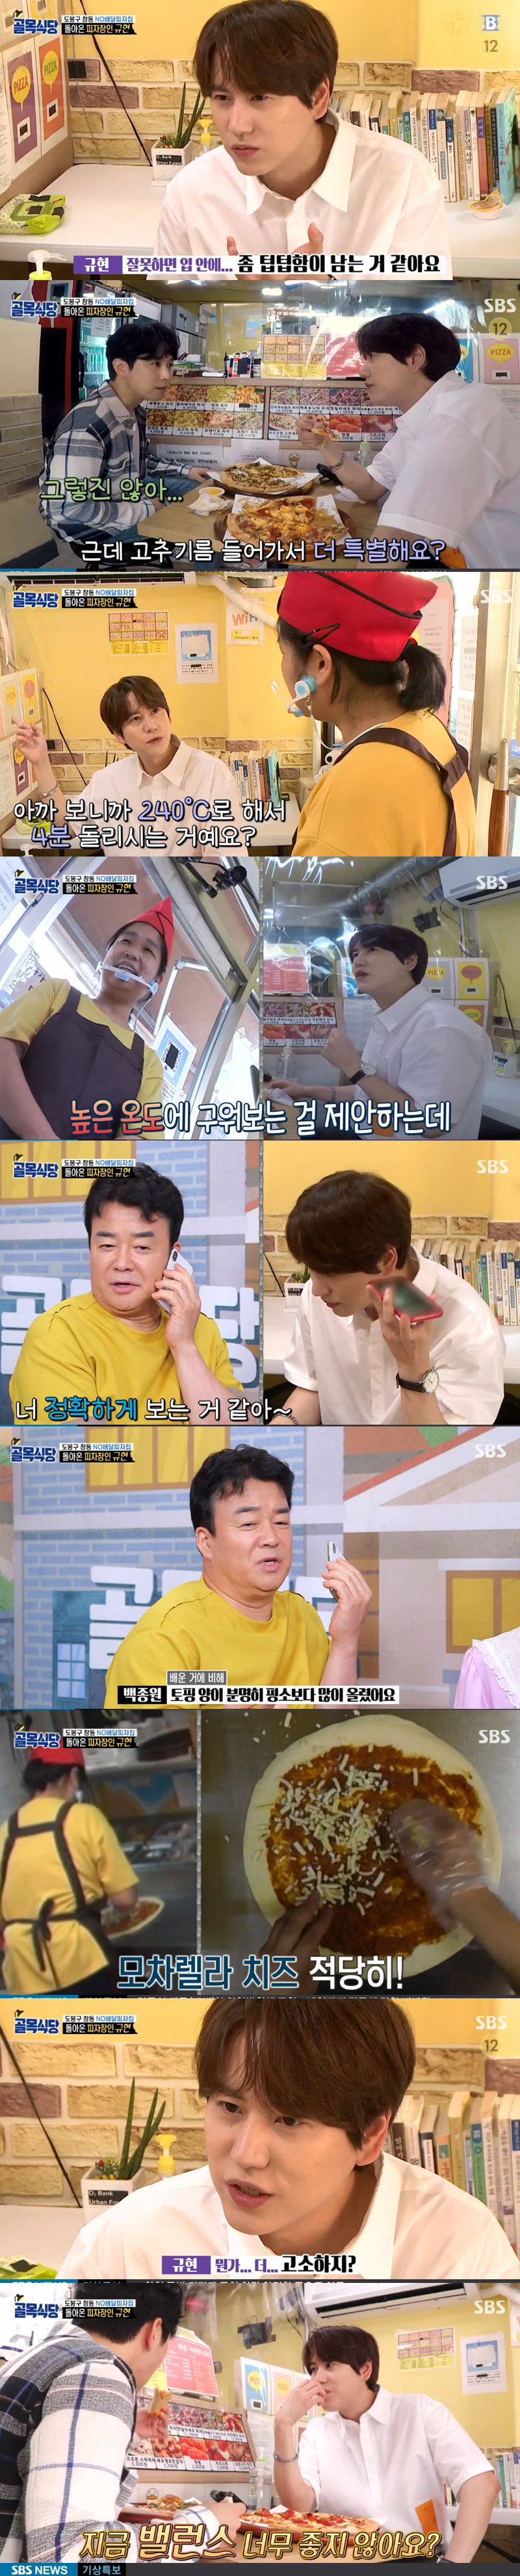 Lee Seung-gi and Cho Kyuhyun, who had been wrinkled in the Chang-dong alley in the past, captivated not only the alley market but also the audience with their cool evaluation and extraordinary horse-drawn hangers.In the SBS entertainment Baek Jong-wons The Ally Restaurant broadcasted on the 26th, the fourth story of the 25th alley, Dobong-gu Chang-dong alley where chicken gangjeong house, NO delivery pizza house,In particular, Lee Seung-gi and Cho Kyuhyun, who spent their school days in Chang-dong, attracted attention by storming as a pre-tour.First, the chicken gangster bosses who captivated Baek Jong-won with their brilliant speech and enthusiasm last week missed the freshness of Garlic, the core of soy sauce Garlic sauce, and received the criticism of Baek Jong-won.Sack used Garlic for sauce, but he did not notice it. Baek Jong-won was greatly disappointed by the bosses who missed the freshness of the ingredients, which is the basis of cooking.The horse is so advanced; they were not interested in the food they made; the horse was so advanced; if you dont keep the basics, its a play and an act, Baek Jong-won said.The bosses of the chicken gangjeong house, who were alerted to the evaluation of the Baek Jong-won day, were committed to selecting Garlic and developing Gangjeong sauce again.In particular, Lee Seung-gi appeared in the test to solve the criticism that the sauce was sour, and the ratio of sugar and starch syrup was different. At this time, Lee Seung-gi appeared and started testing test instead of finished product for the first time.Lee Seung-gi looked at the bosses of the chicken gangjeong house, Is it a lot of trouble?It is growing up in the meantime, he said, and in the process of testing the chicken gangjeong sauce, he was more serious than anyone else and made Baek Jong-won happy.Lee Seung-gi, in a blind test for chicken Gangjeongs texture, said: It is likely that it is important whether chicken is first or sweet first in chicken Gangjeong; personally chicken is first.There is a feeling that it is more Gangjeong even when chewing more sugar than starch syrup. Baek Jong-won said, I am also from the former president, he said, expressing his thoughts by listening seriously to the opinions of the president who showed other opinions.In addition, Lee Seung-gi paid 100,000 won for the chicken gangjeong he tested, and he showed an extraordinary horse-drawn hanger. You do not have to give me no shine.If you have a lot of it, buy more ingredients and practice more. Cho Kyuhyun, who appeared after Chang-dong brother Lee Seung-gi, Hwadeok pizza artisan, found NO delivery pizza house.The boss laughed at the appearance of Cho Kyuhyun, saying, The pizza craftsman came. Cho Kyuhyun entered the NO delivery pizza house with a shrug.Cho Kyuhyun tasted tuna pizza that he had never heard of. Cho Kyuhyun honestly commented, I do not feel tuna pizza, but I am impressed and I do not think it is like this.Also, about Salami pizza, I do not think the taste of red pepper oil is very strong.I do not know if the pepper oil is more special because it goes in. Cho Kyuhyun, who has been studying the pizza taste somewhere, suggested to the boss to bake pizza at a high temperature, and Baek Jong-won called Cho Kyuhyun and said, I analyzed it accurately.The boss did not increase the amount of toppings as he habitually did, so he could not save my taste. The boss made pizza again as he learned, and Cho Kyuhyun said, It is more sue.I dont think its as bland as before. Its much more balanced. Its not tough. Balance is so good, she said, expressing satisfaction.